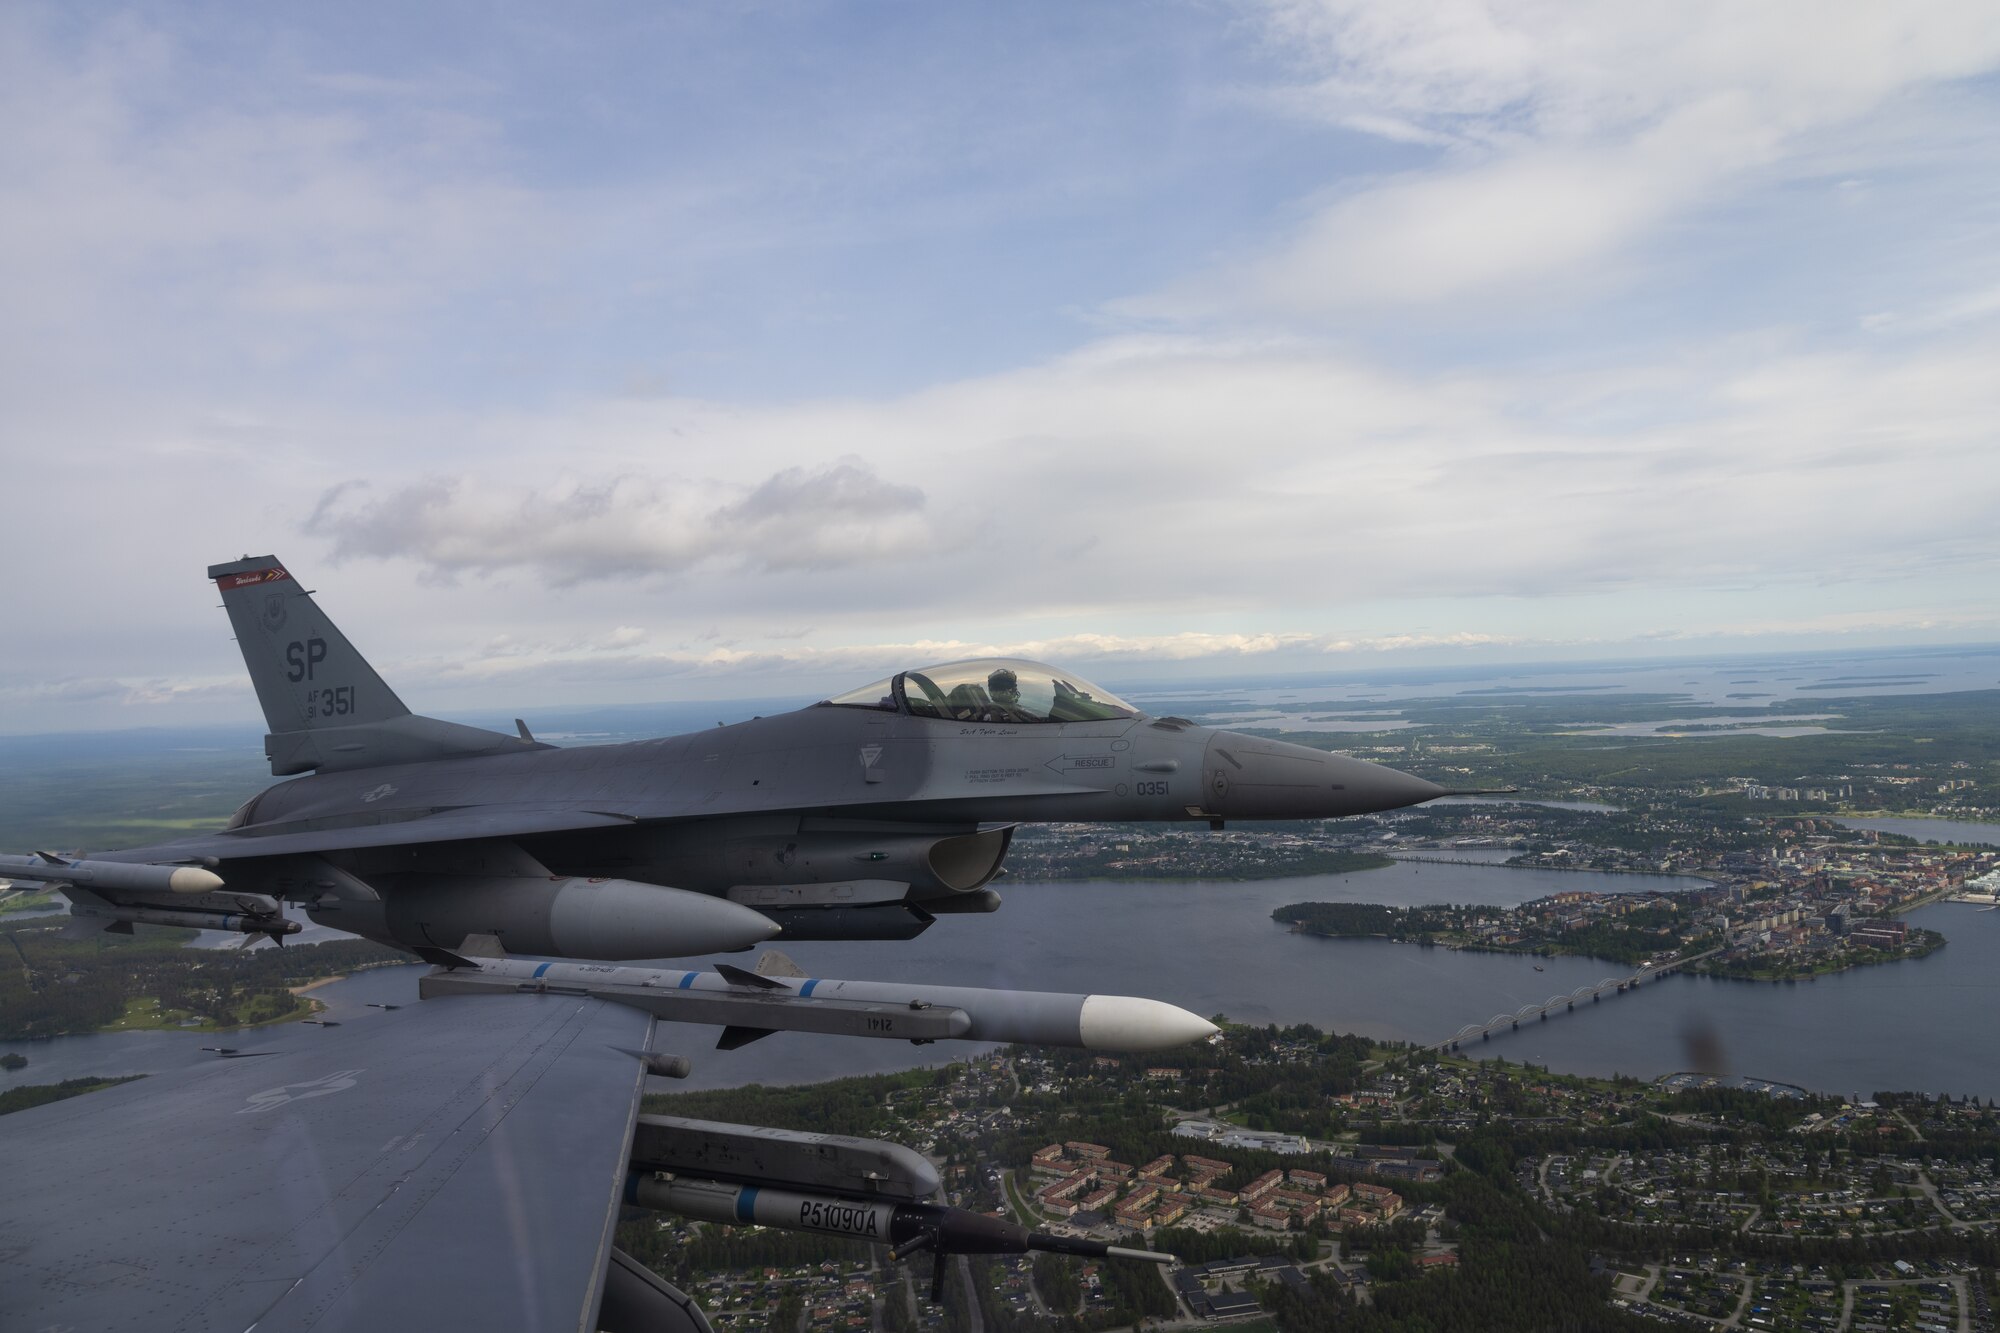 Two U.S. Air Force F-16 fly in formation over Luleå, Sweden, June 14, 2021. Exercises like the Arctic Challenge Exercise 2021 give USAF participants the opportunity to build partnerships, train with Nordic Allies, and maximize interoperability within the Nordic region. (U.S. Air Force photo by Senior Airman Ali Stewart)